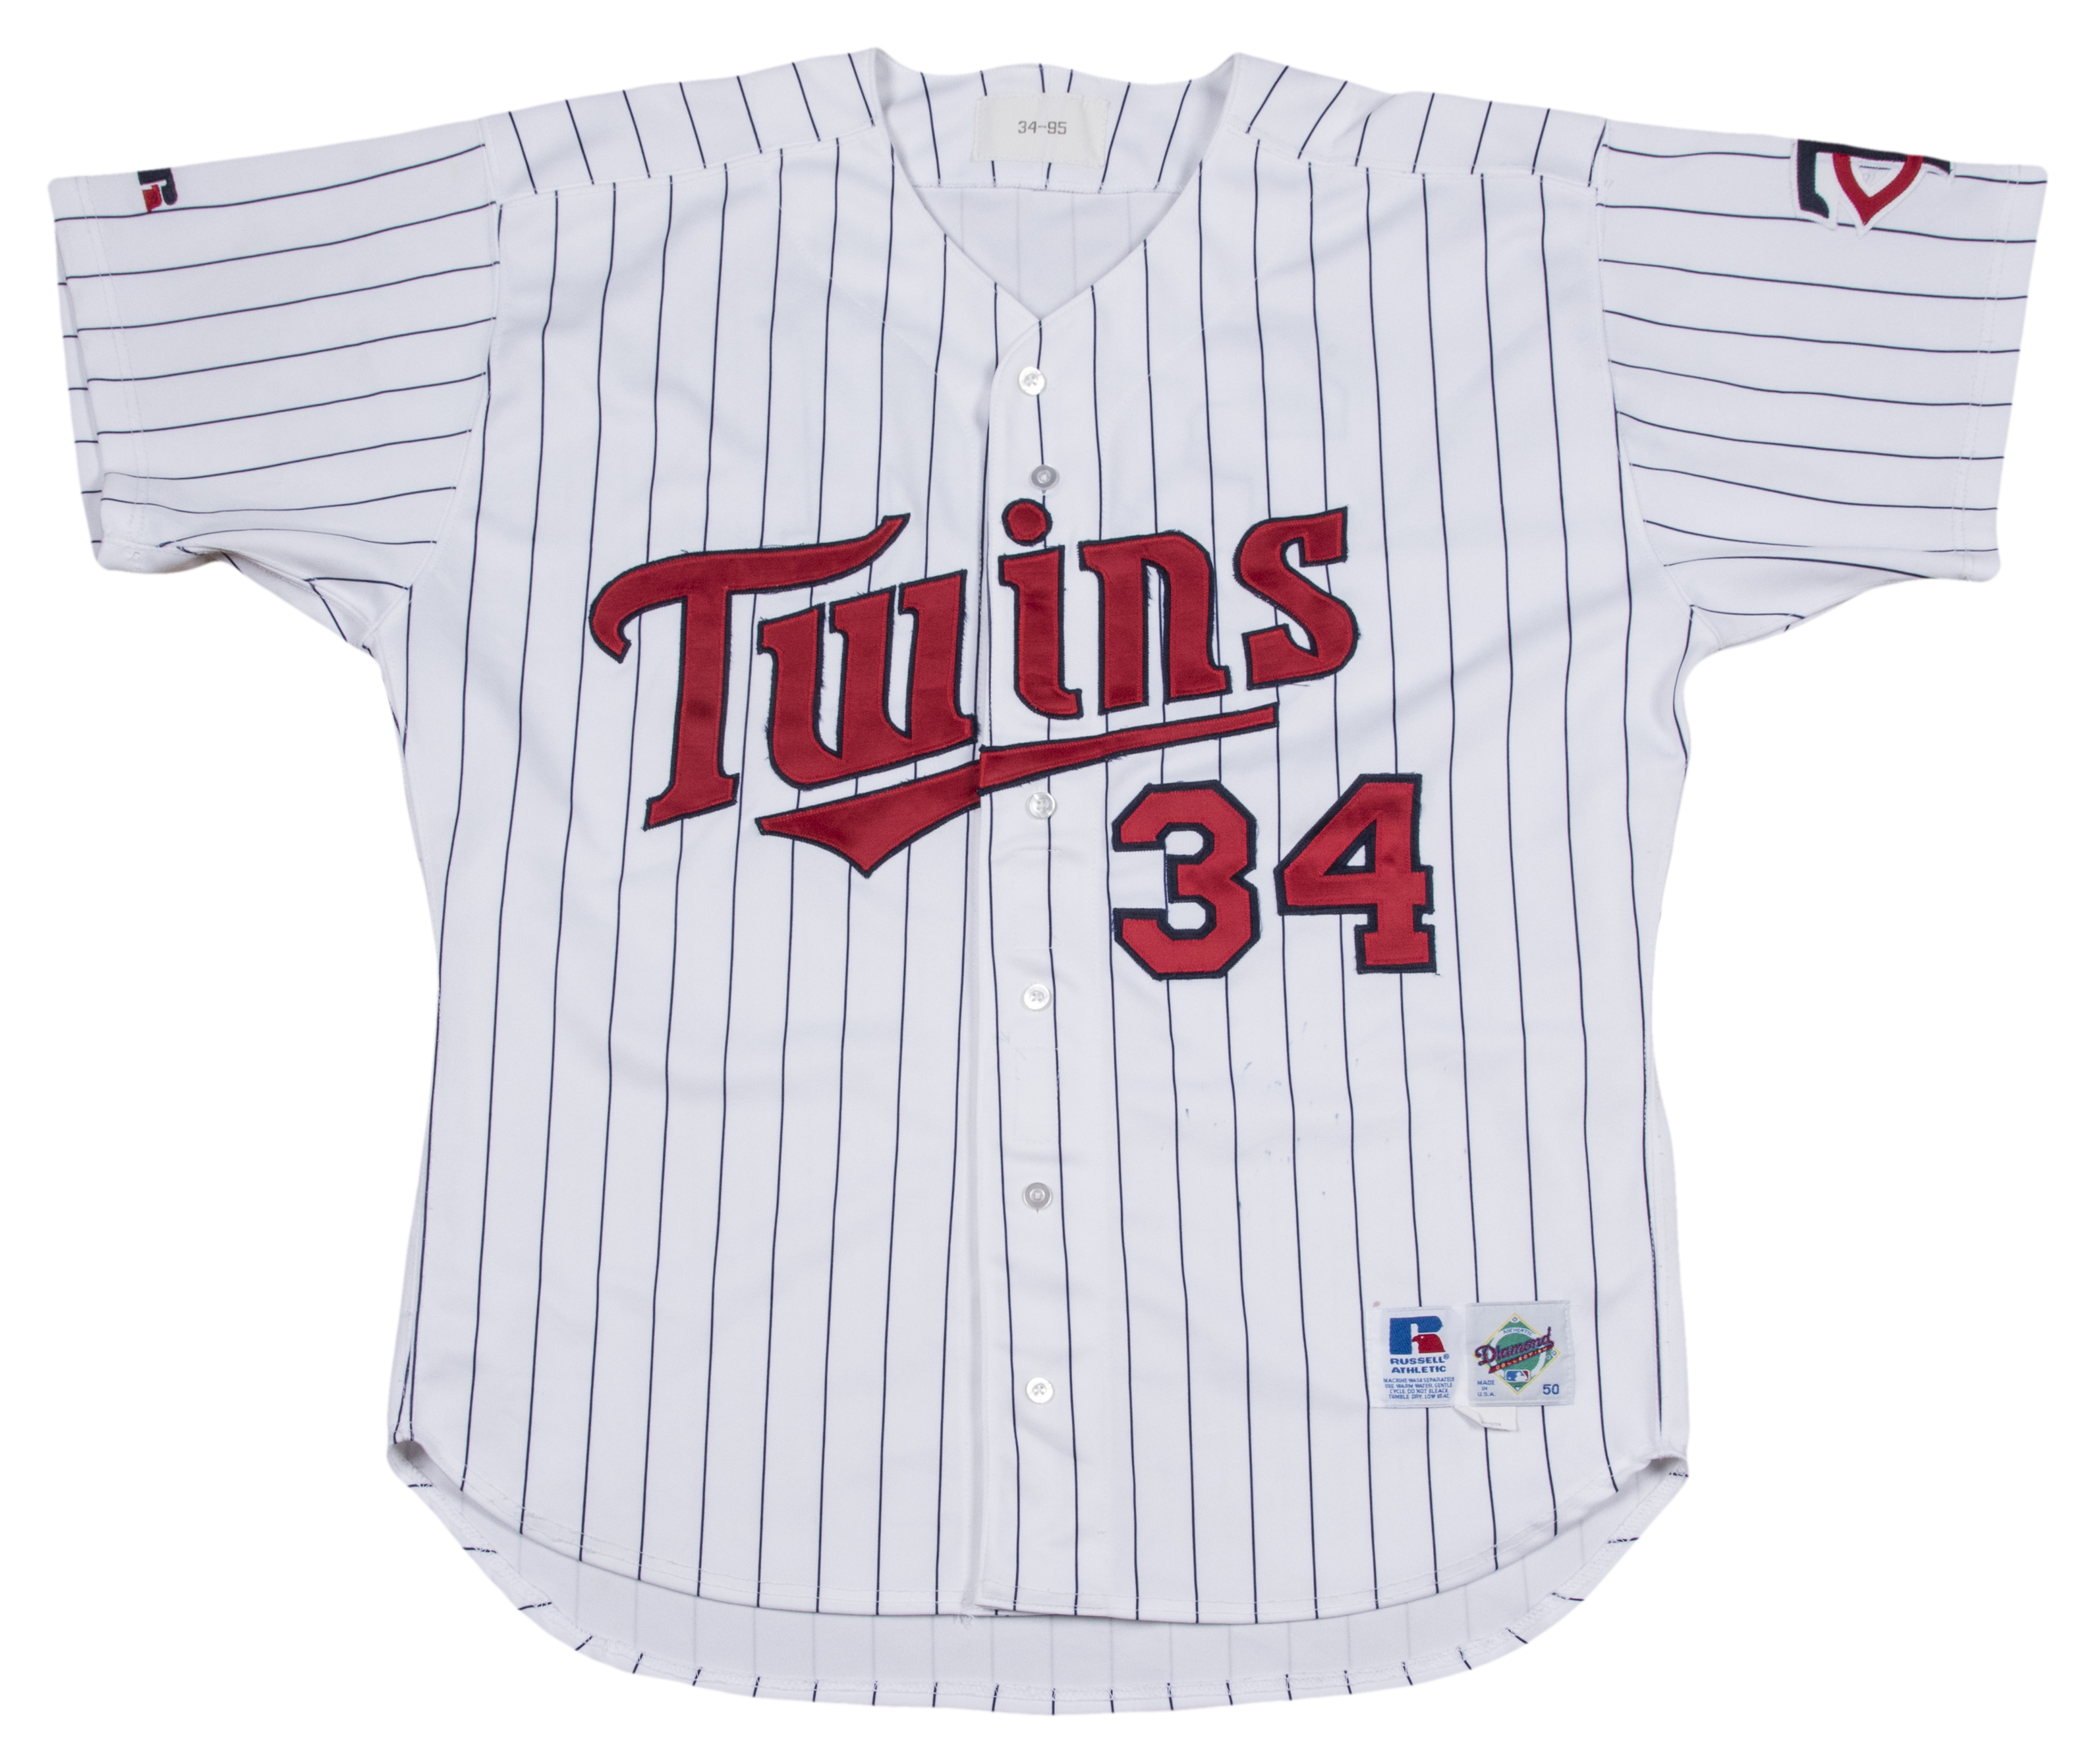 Lot Detail - 1995 Kirby Puckett Game Used Minnesota Twins Home Jersey